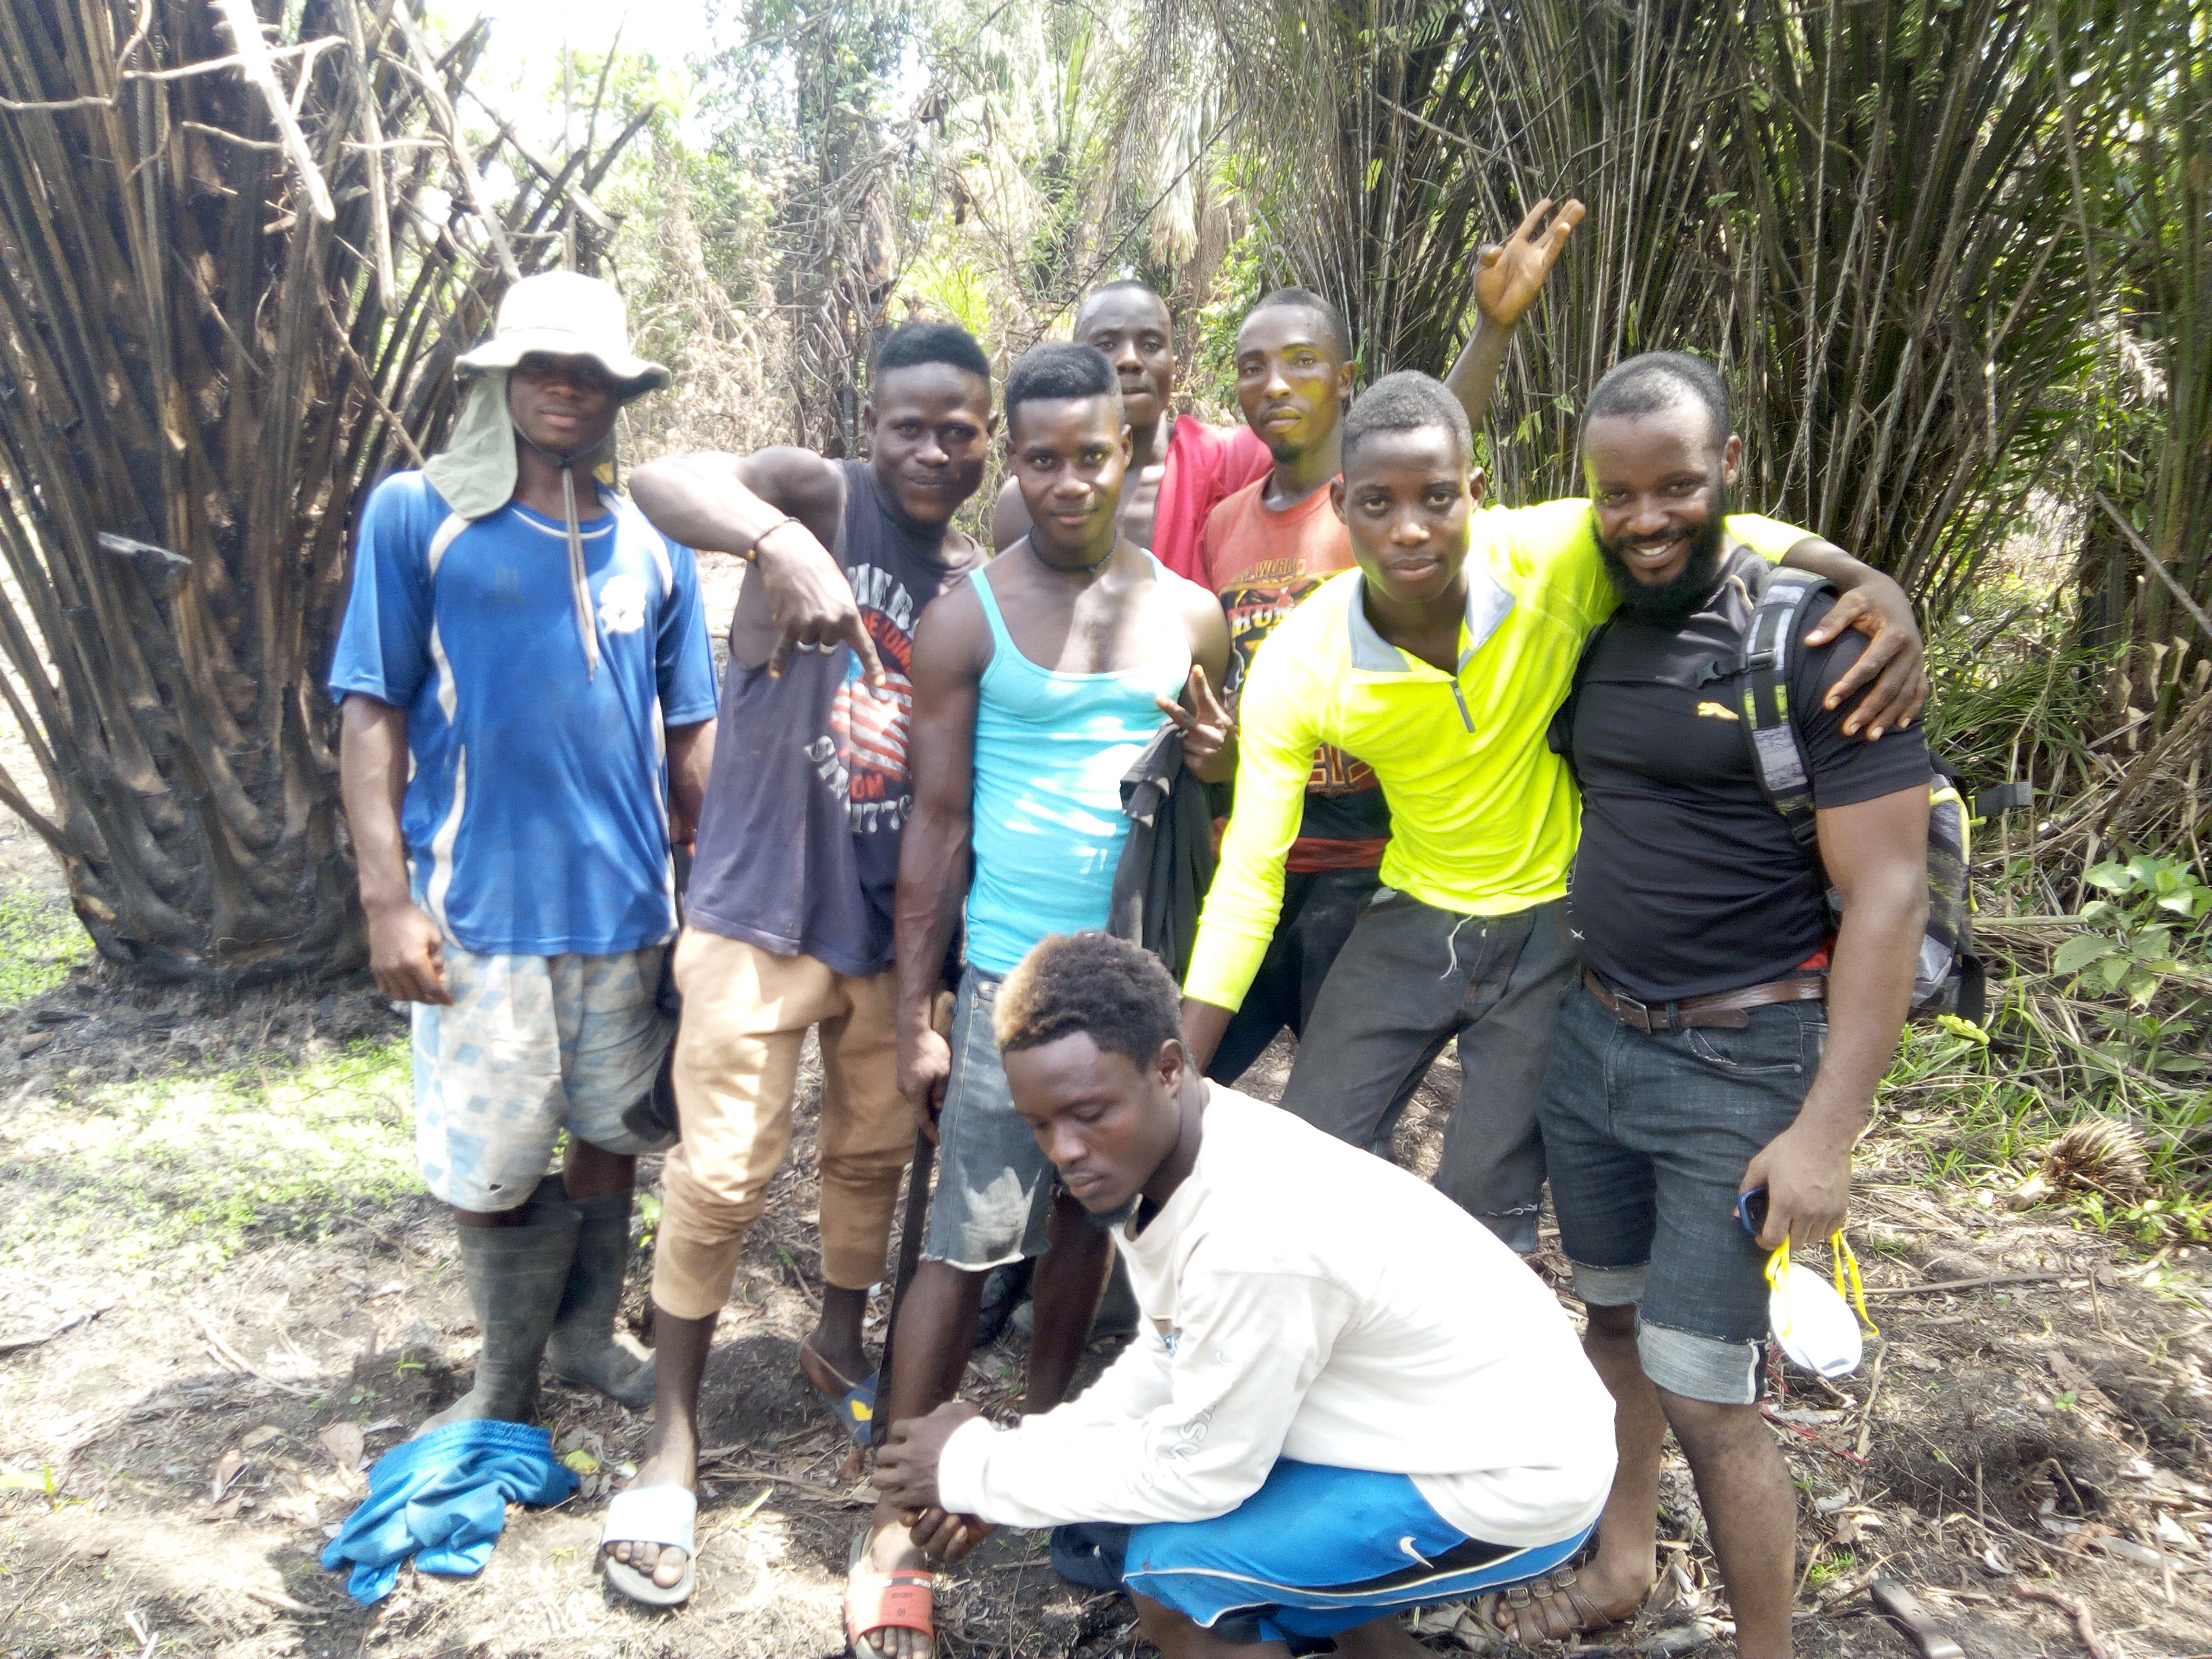 This is a photo of some of the local workers hired to help clear land and help carry bamboo poles to build the nursery.